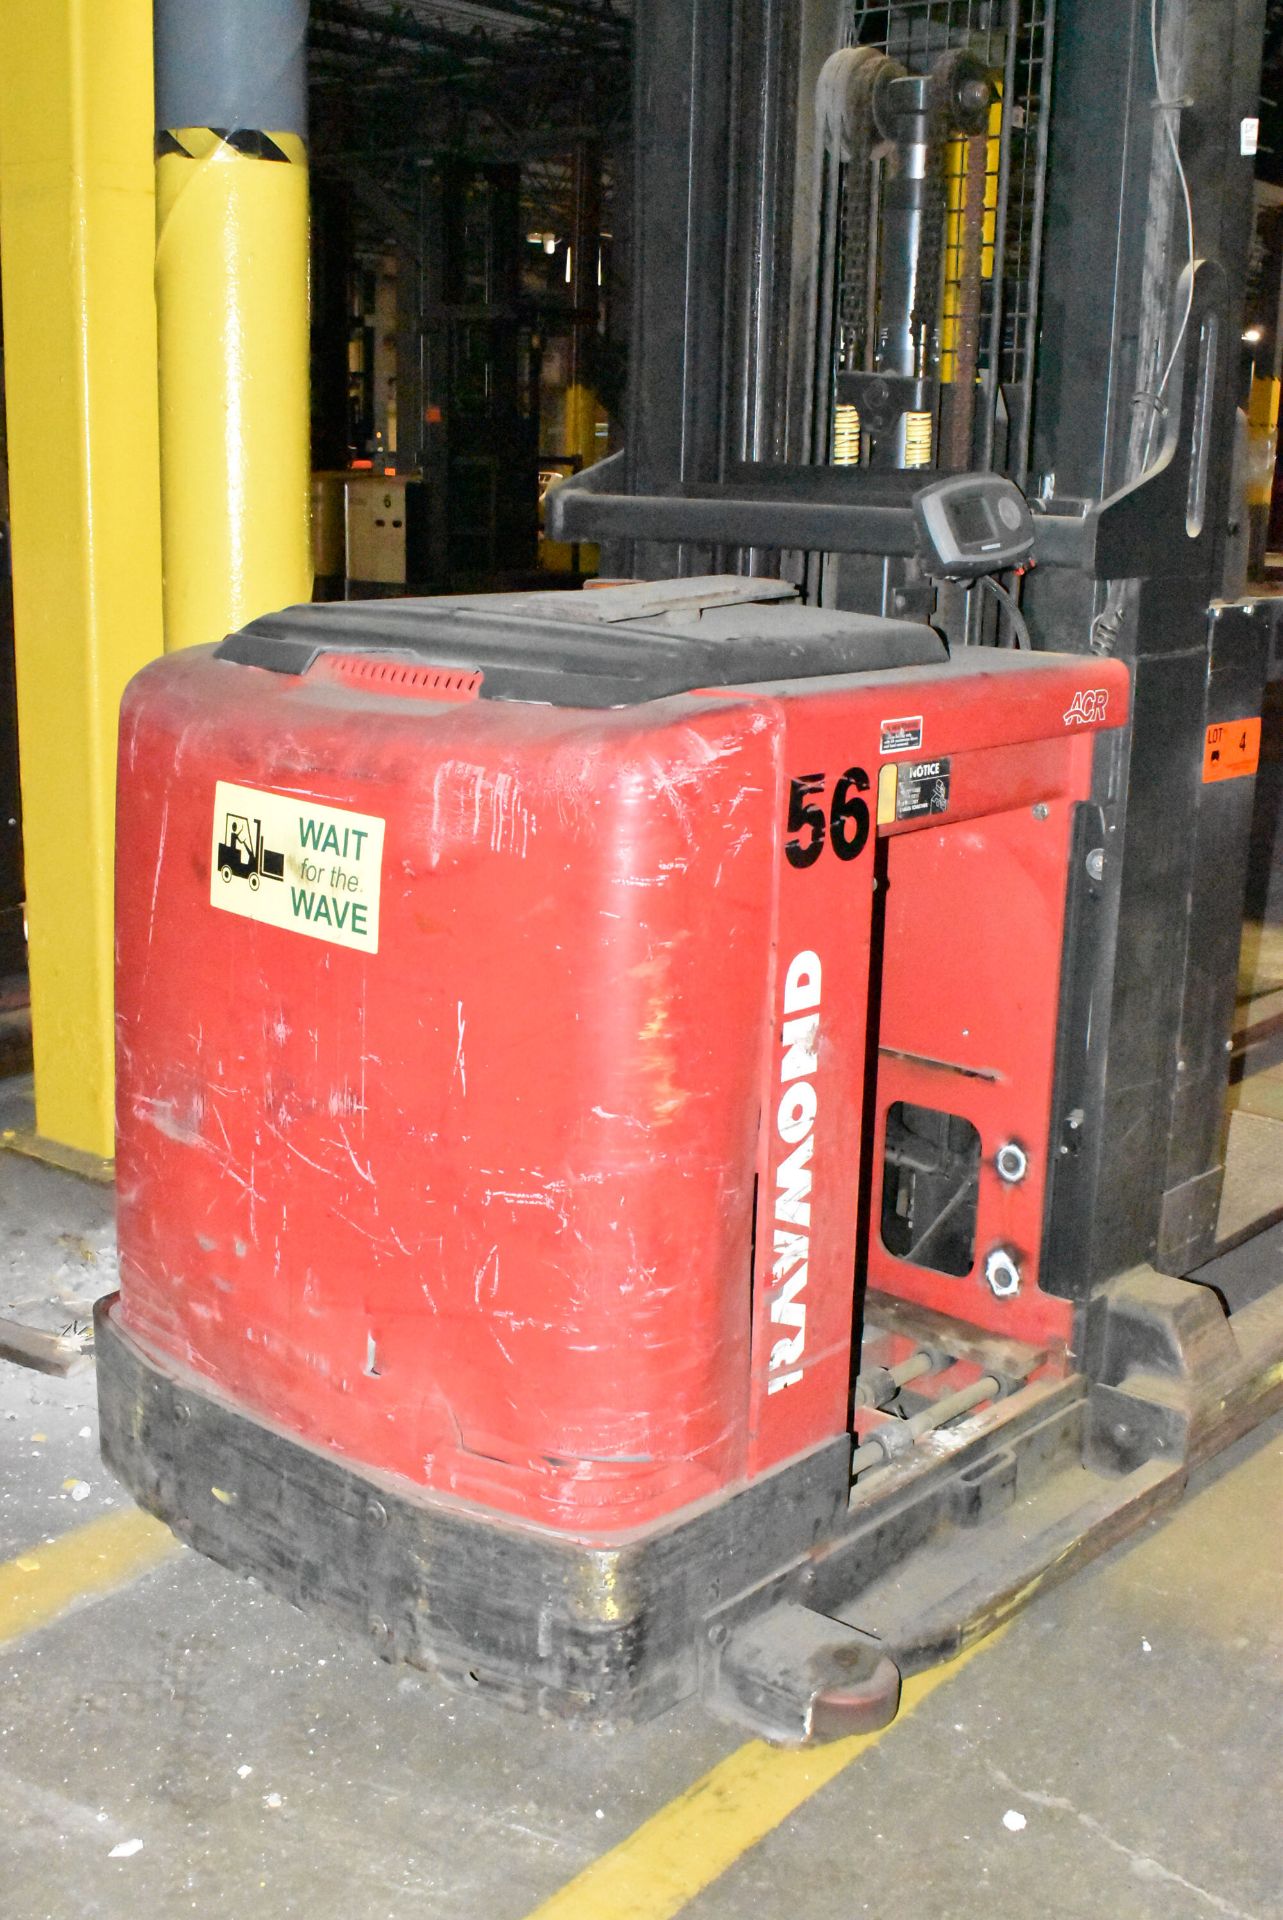 RAYMOND (2014) 560-OPC30TT 1,700 LB. CAPACITY 36V ELECTRIC ORDER PICKER WITH 330" MAX. LIFT - Image 4 of 8